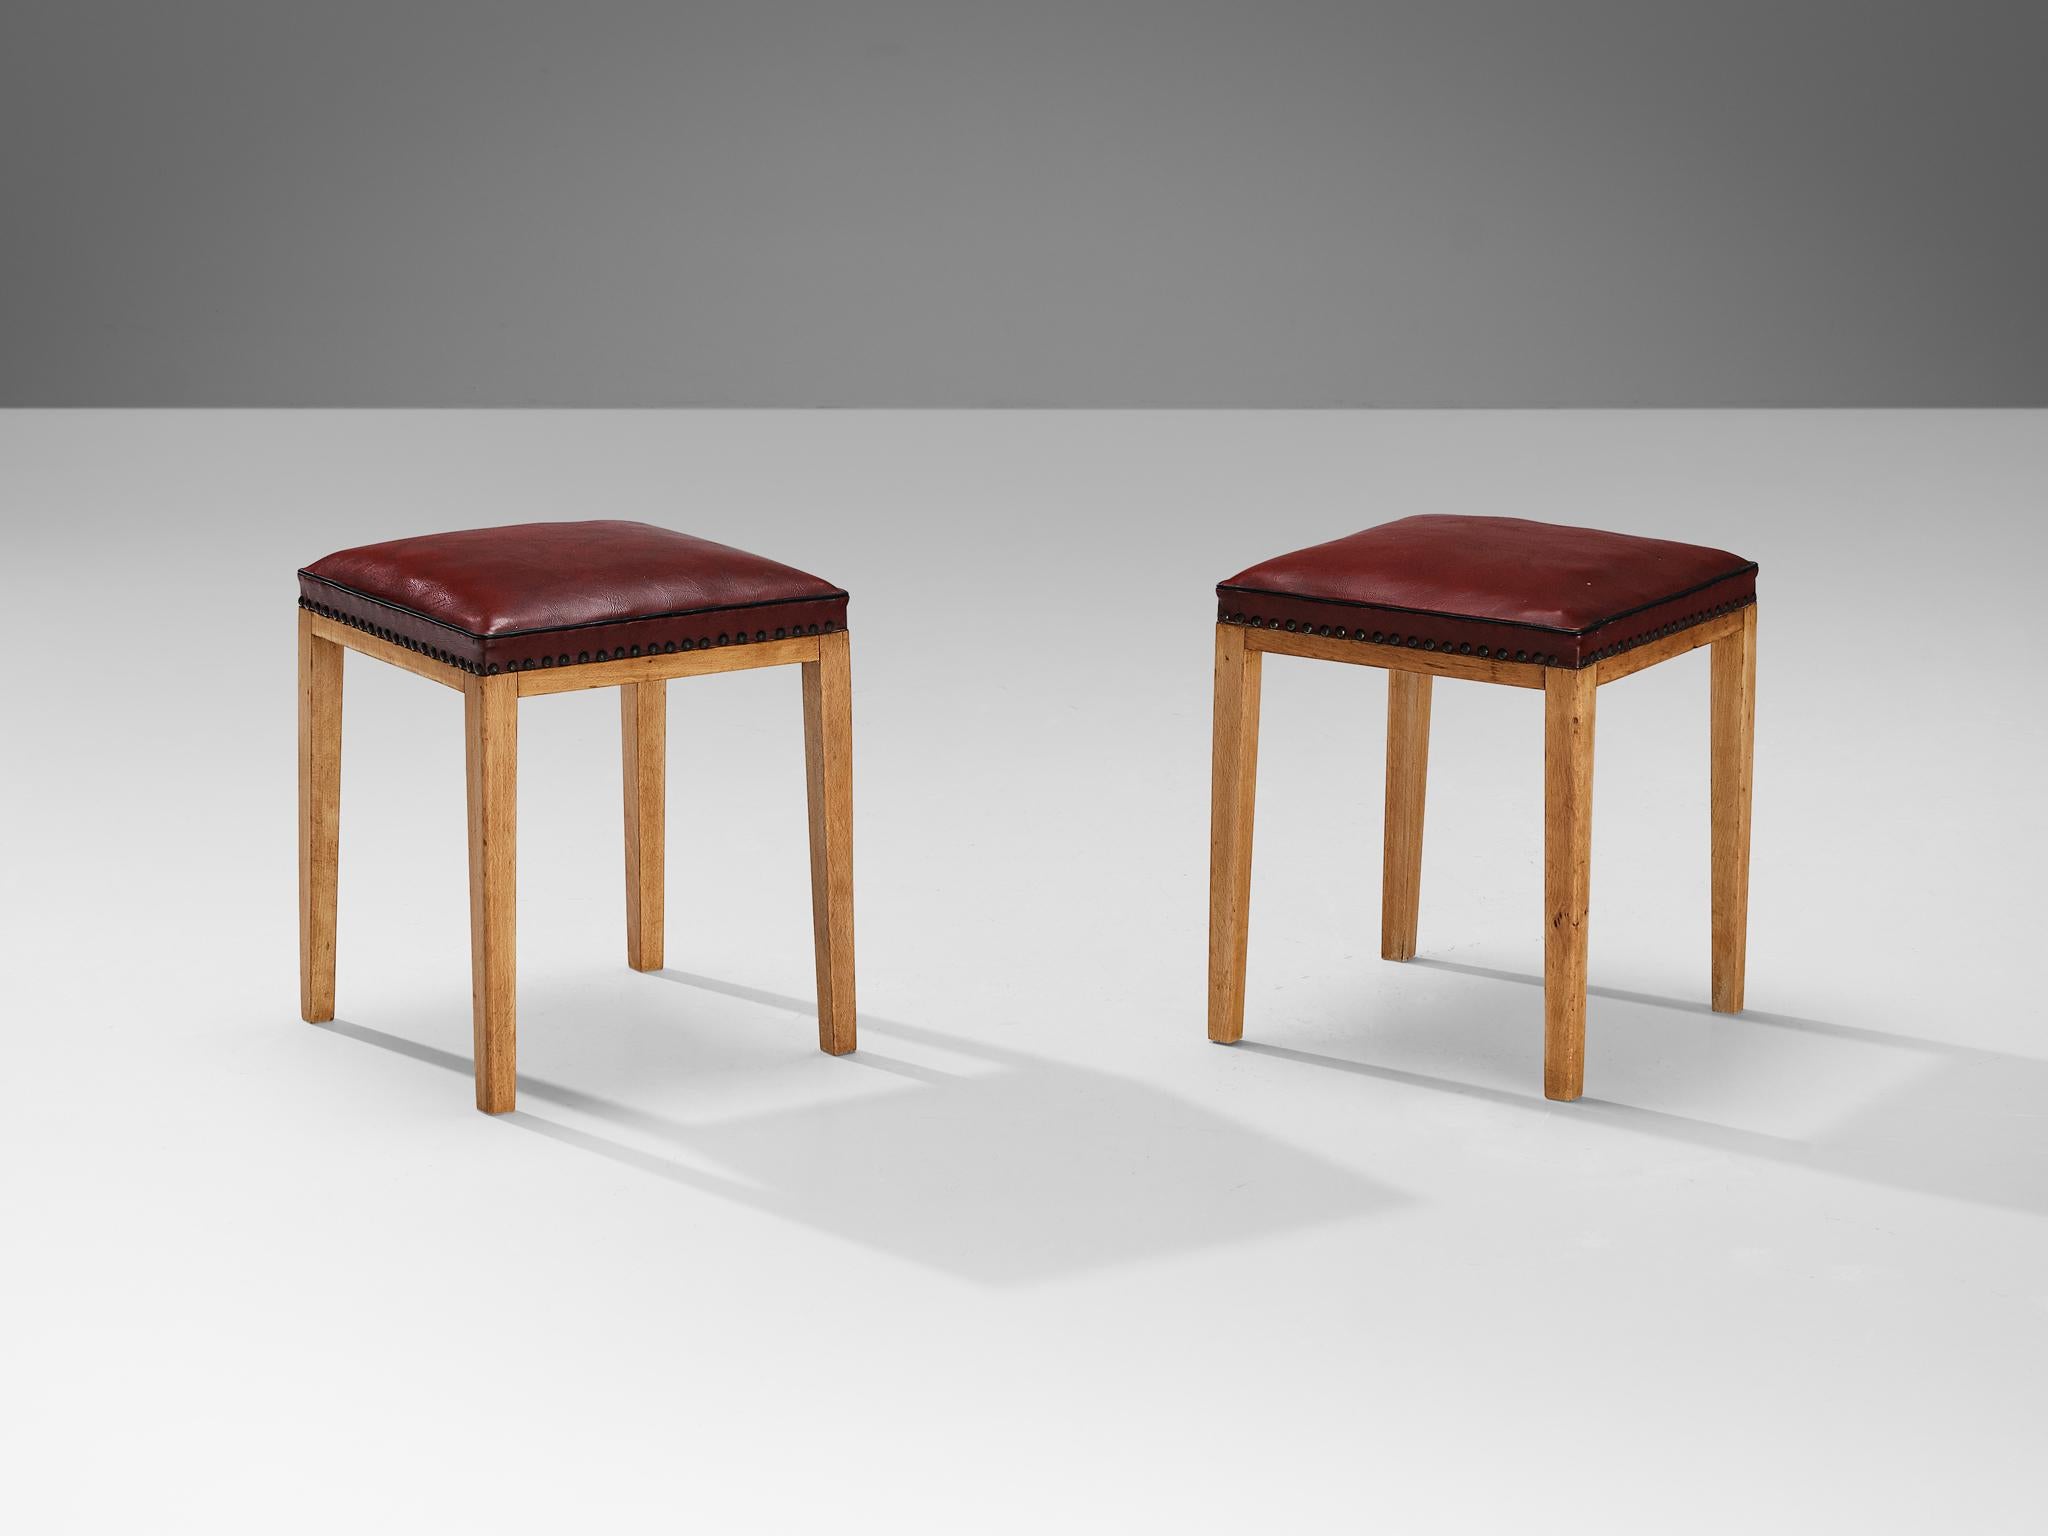 Pair of stools or ottomans, faux leather, beech, brass, Denmark, 1940s

These elegant Scandinavian Modern stools are characterized by a simple construction, showcasing clean lines and distinct angular forms. The seat is crafted using leatherette in